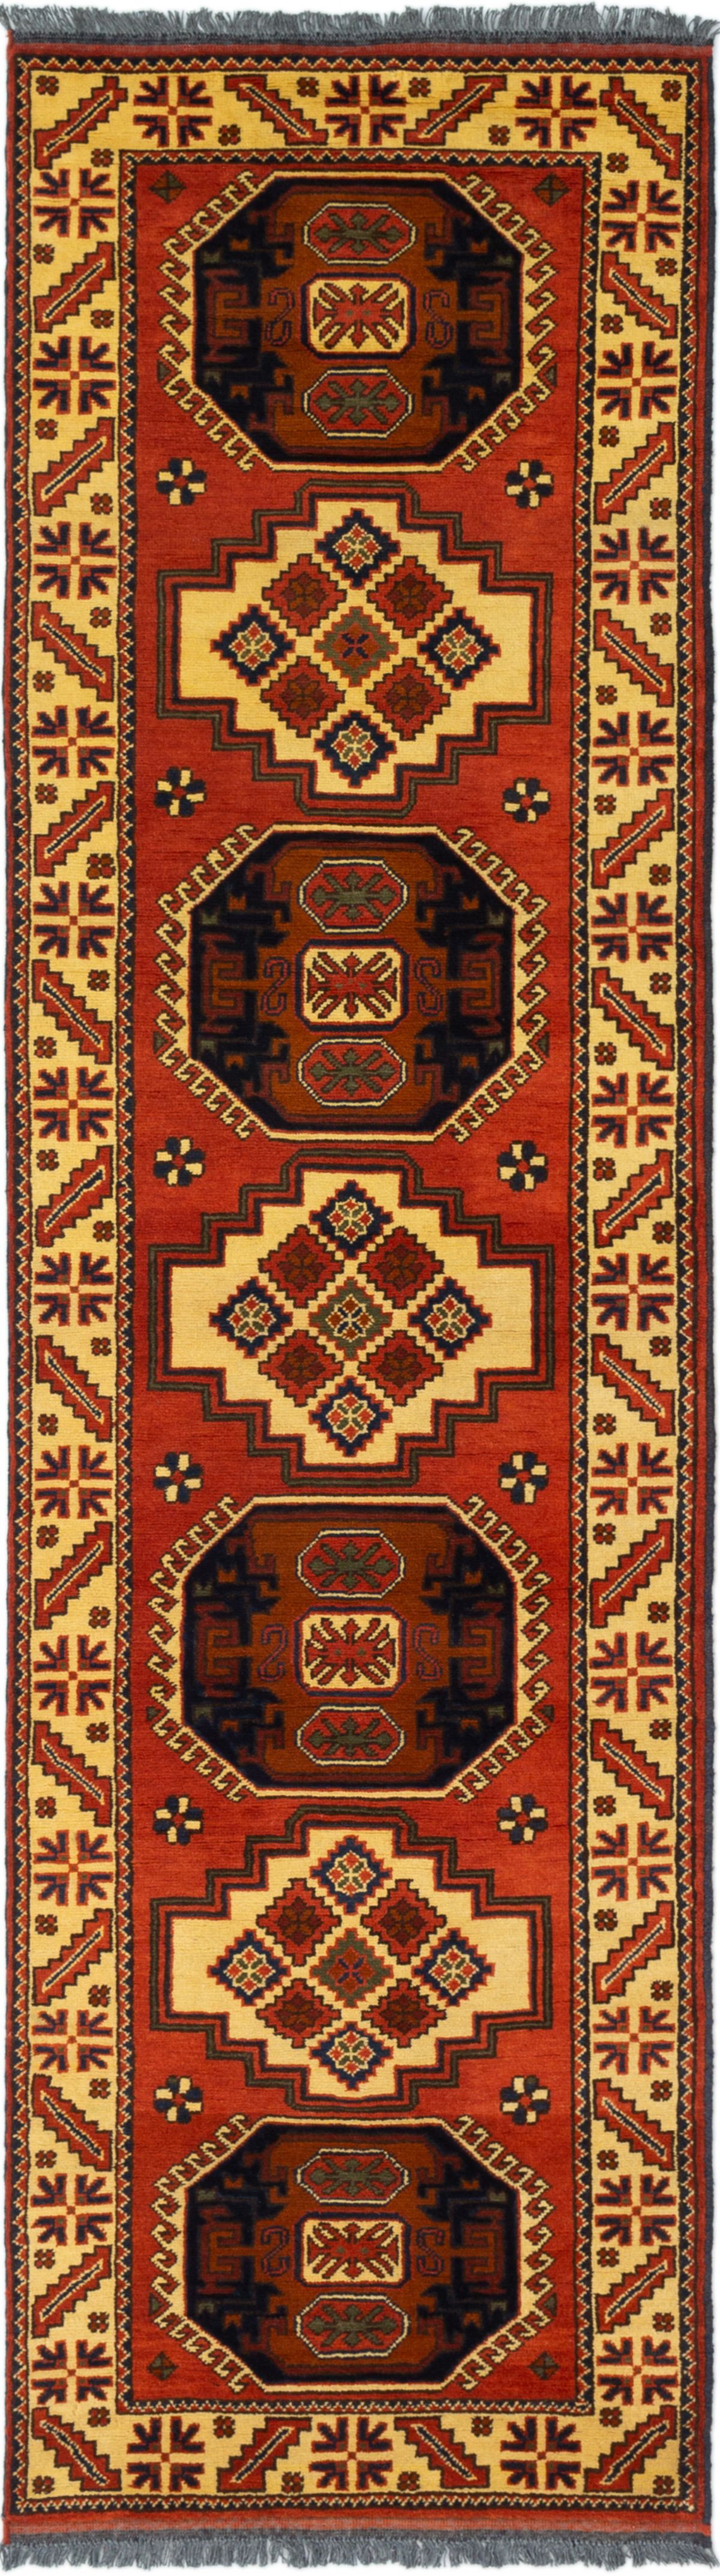 Hand-knotted Finest Kargahi Copper Wool Rug 2'9" x 10'2" Size: 2'9" x 10'2"  